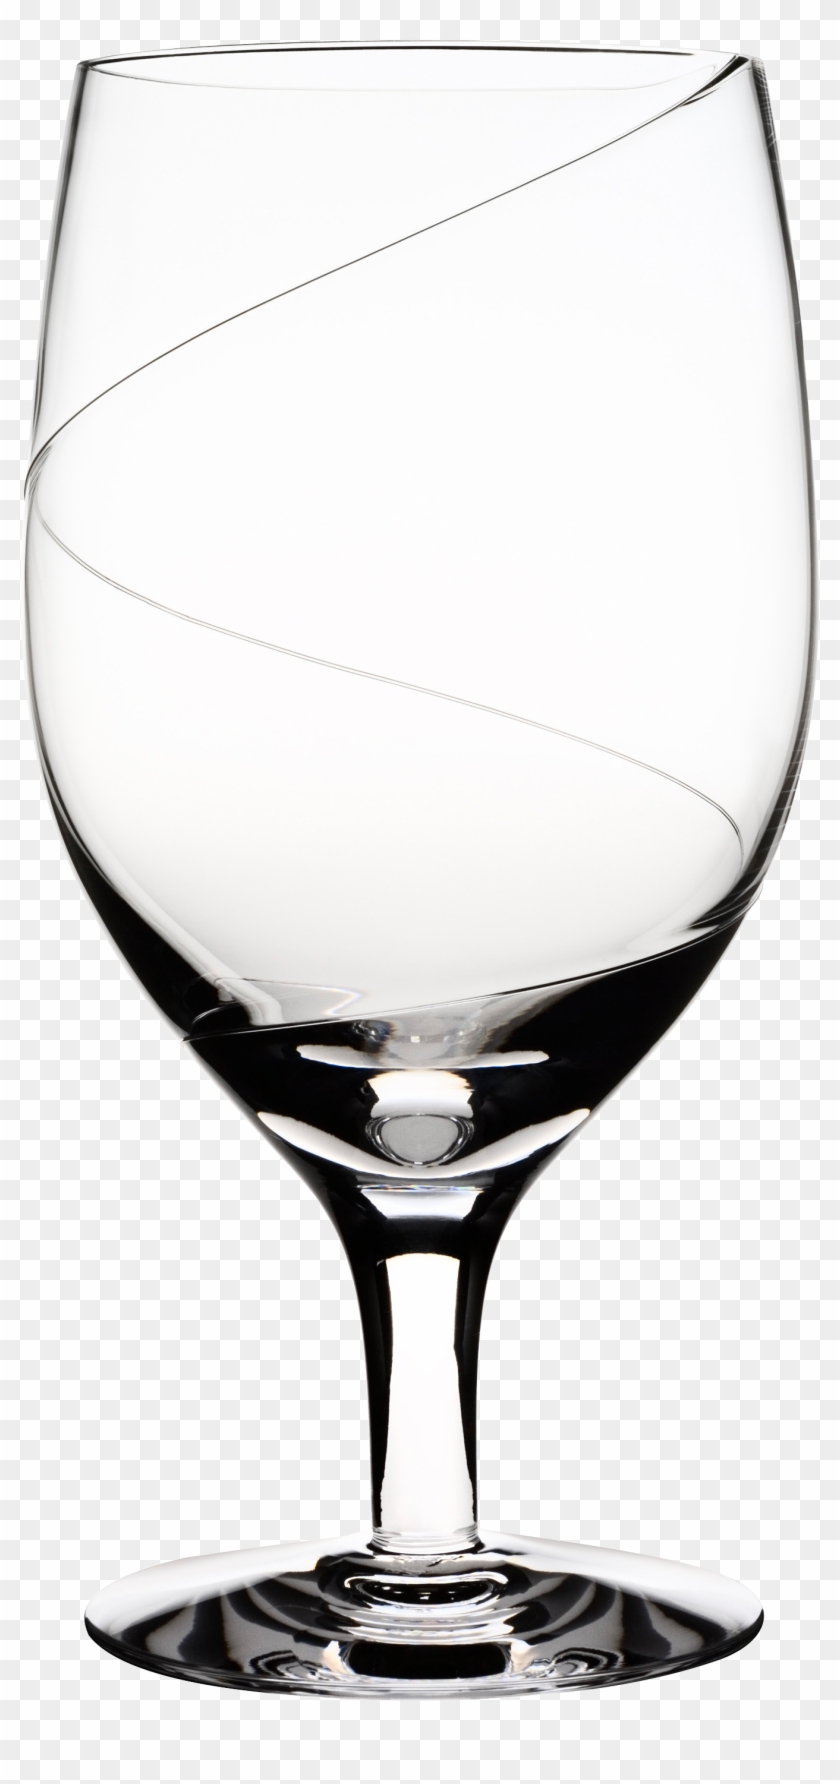 Empty Wine Glass Png Image - Wine Glass Png Transparant #206966